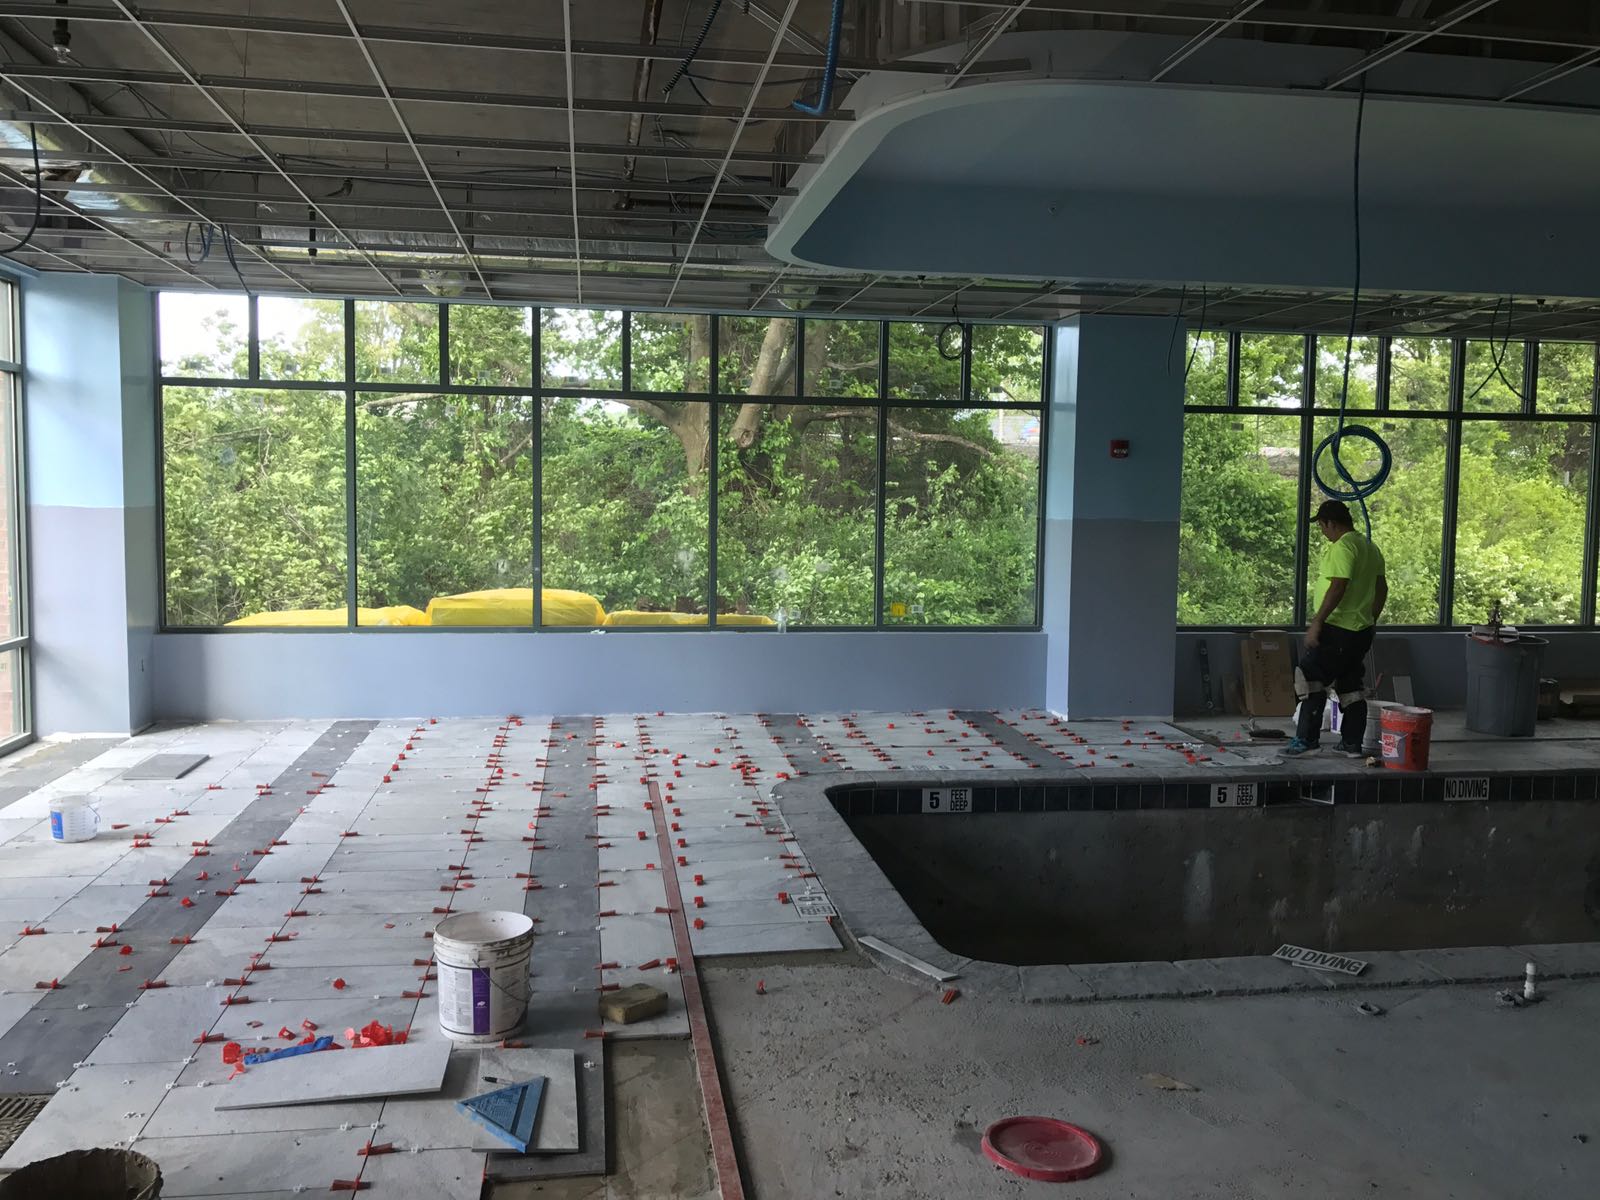 An indoor pool with a new deck being installed